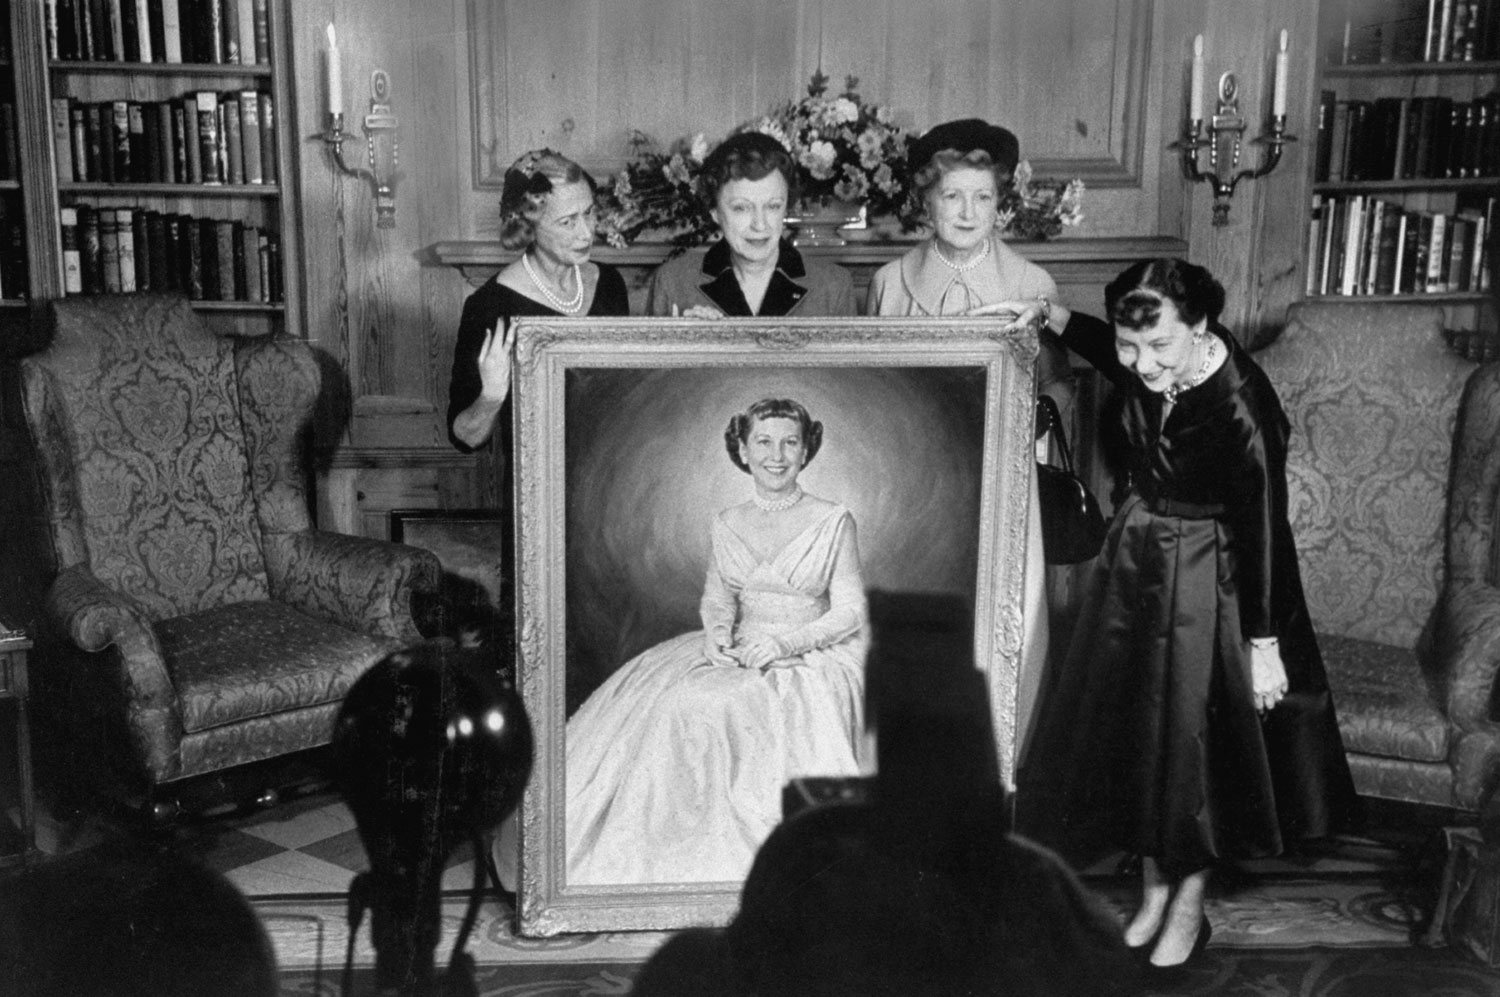 First Lady Mamie Eisenhower with a portrait of herself in her inauguration ball dress, given to her by husband, Dwight D. Eisenhower for her 60th birthday, 1956.